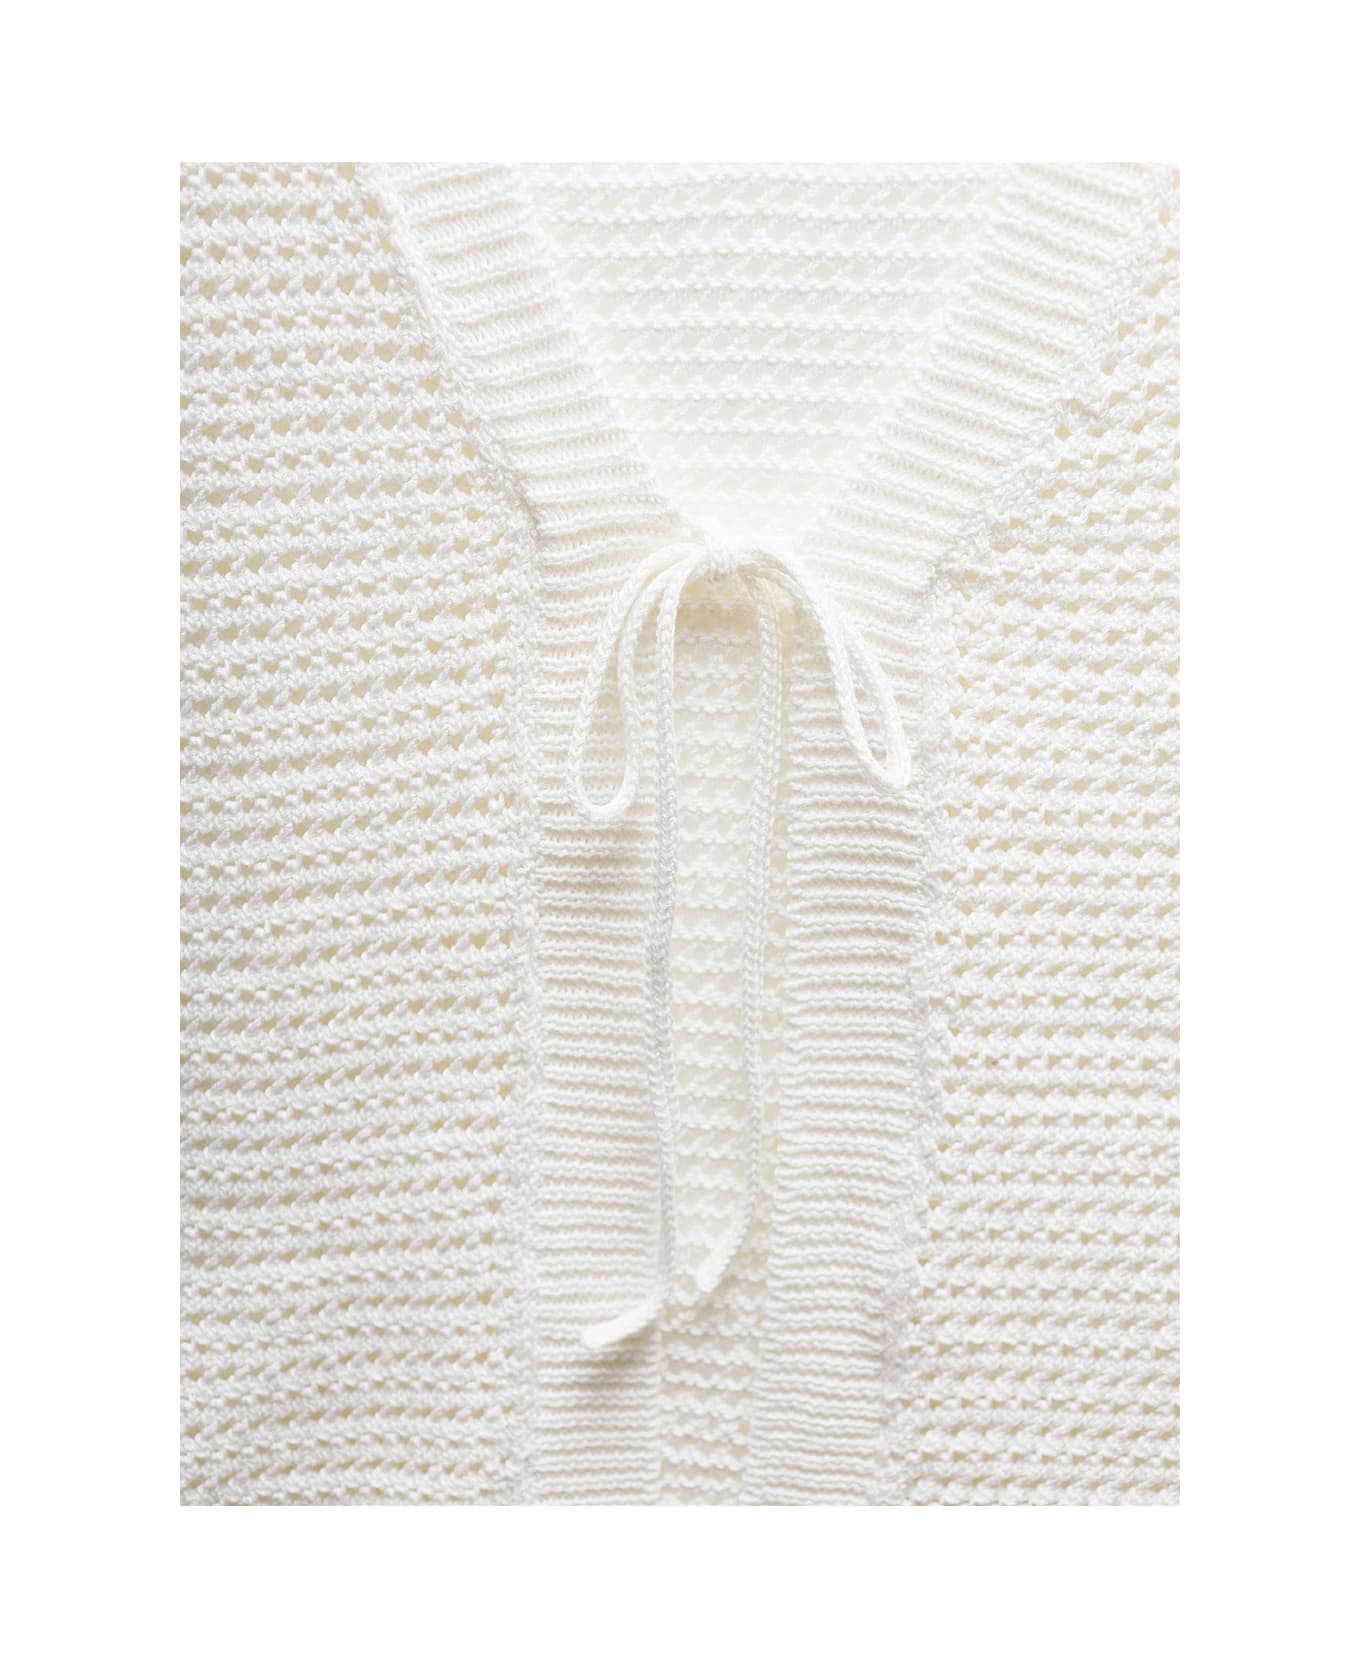 A.P.C. 'maggie' White Short-sleeve Cardigan In Crochet Woman - White カーディガン